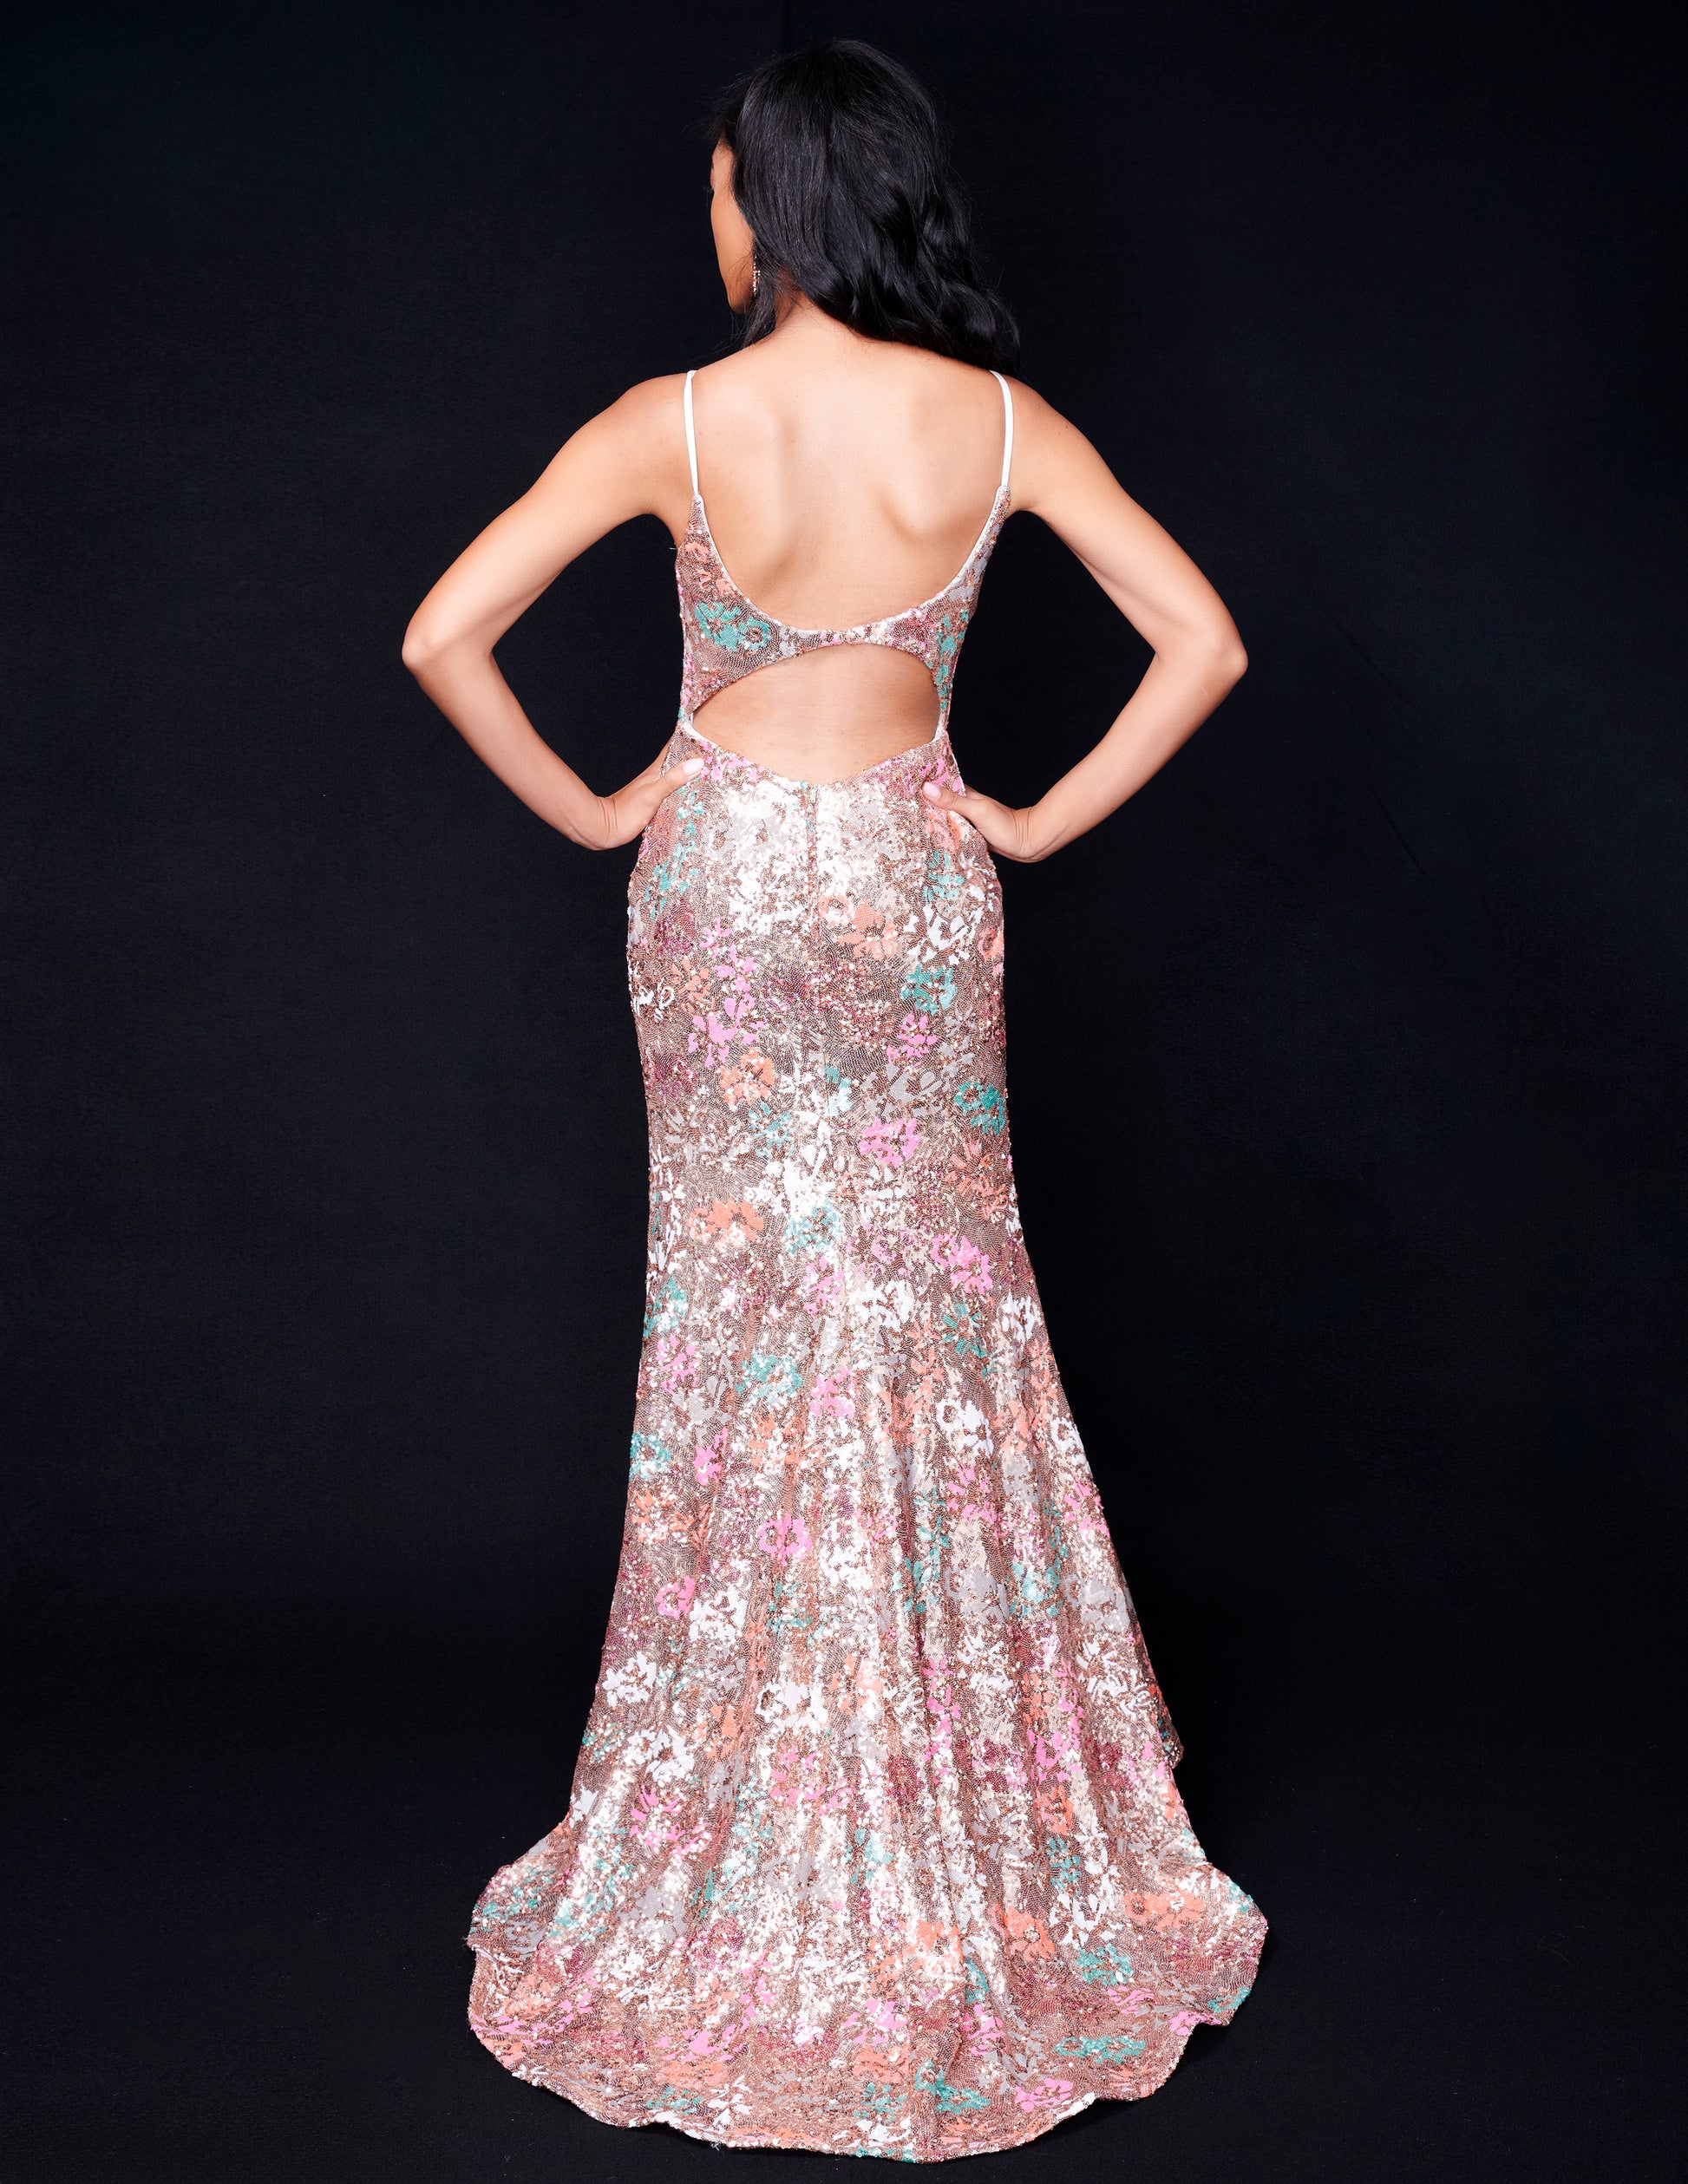 <p data-mce-fragment="1">Be the star of the evening in the Nina Canacci 2393 Sequin Floral Prom Dress. This stunning gown features a beautiful floral sequin design, a flattering backless style, and a fitted V neck silhouette. Perfect for formal events or as a guest, this dress will have all eyes on you.</p> <p data-mce-fragment="1">Sizes: 0-12</p> <p data-mce-fragment="1">Colors: Gold/Multi</p>